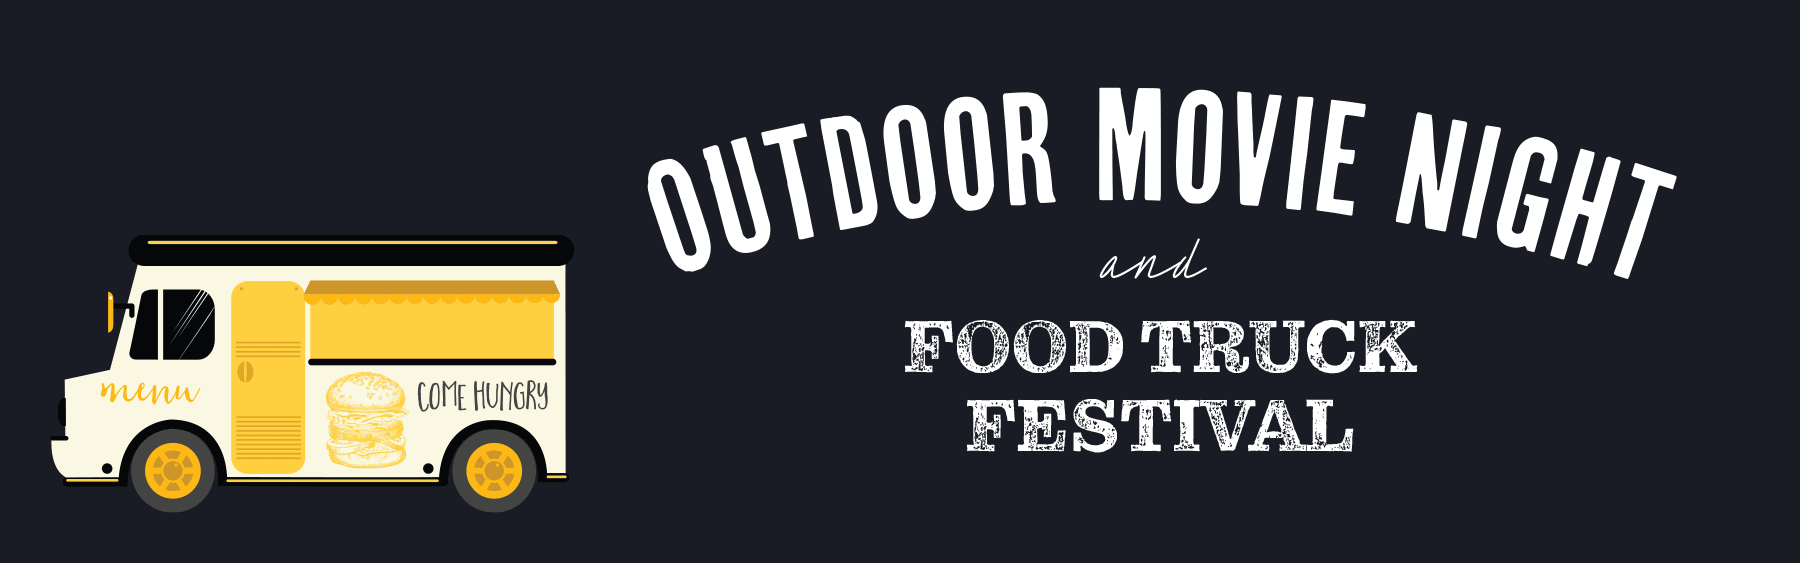 OUtdoor Movie Night and Food Truck Festival